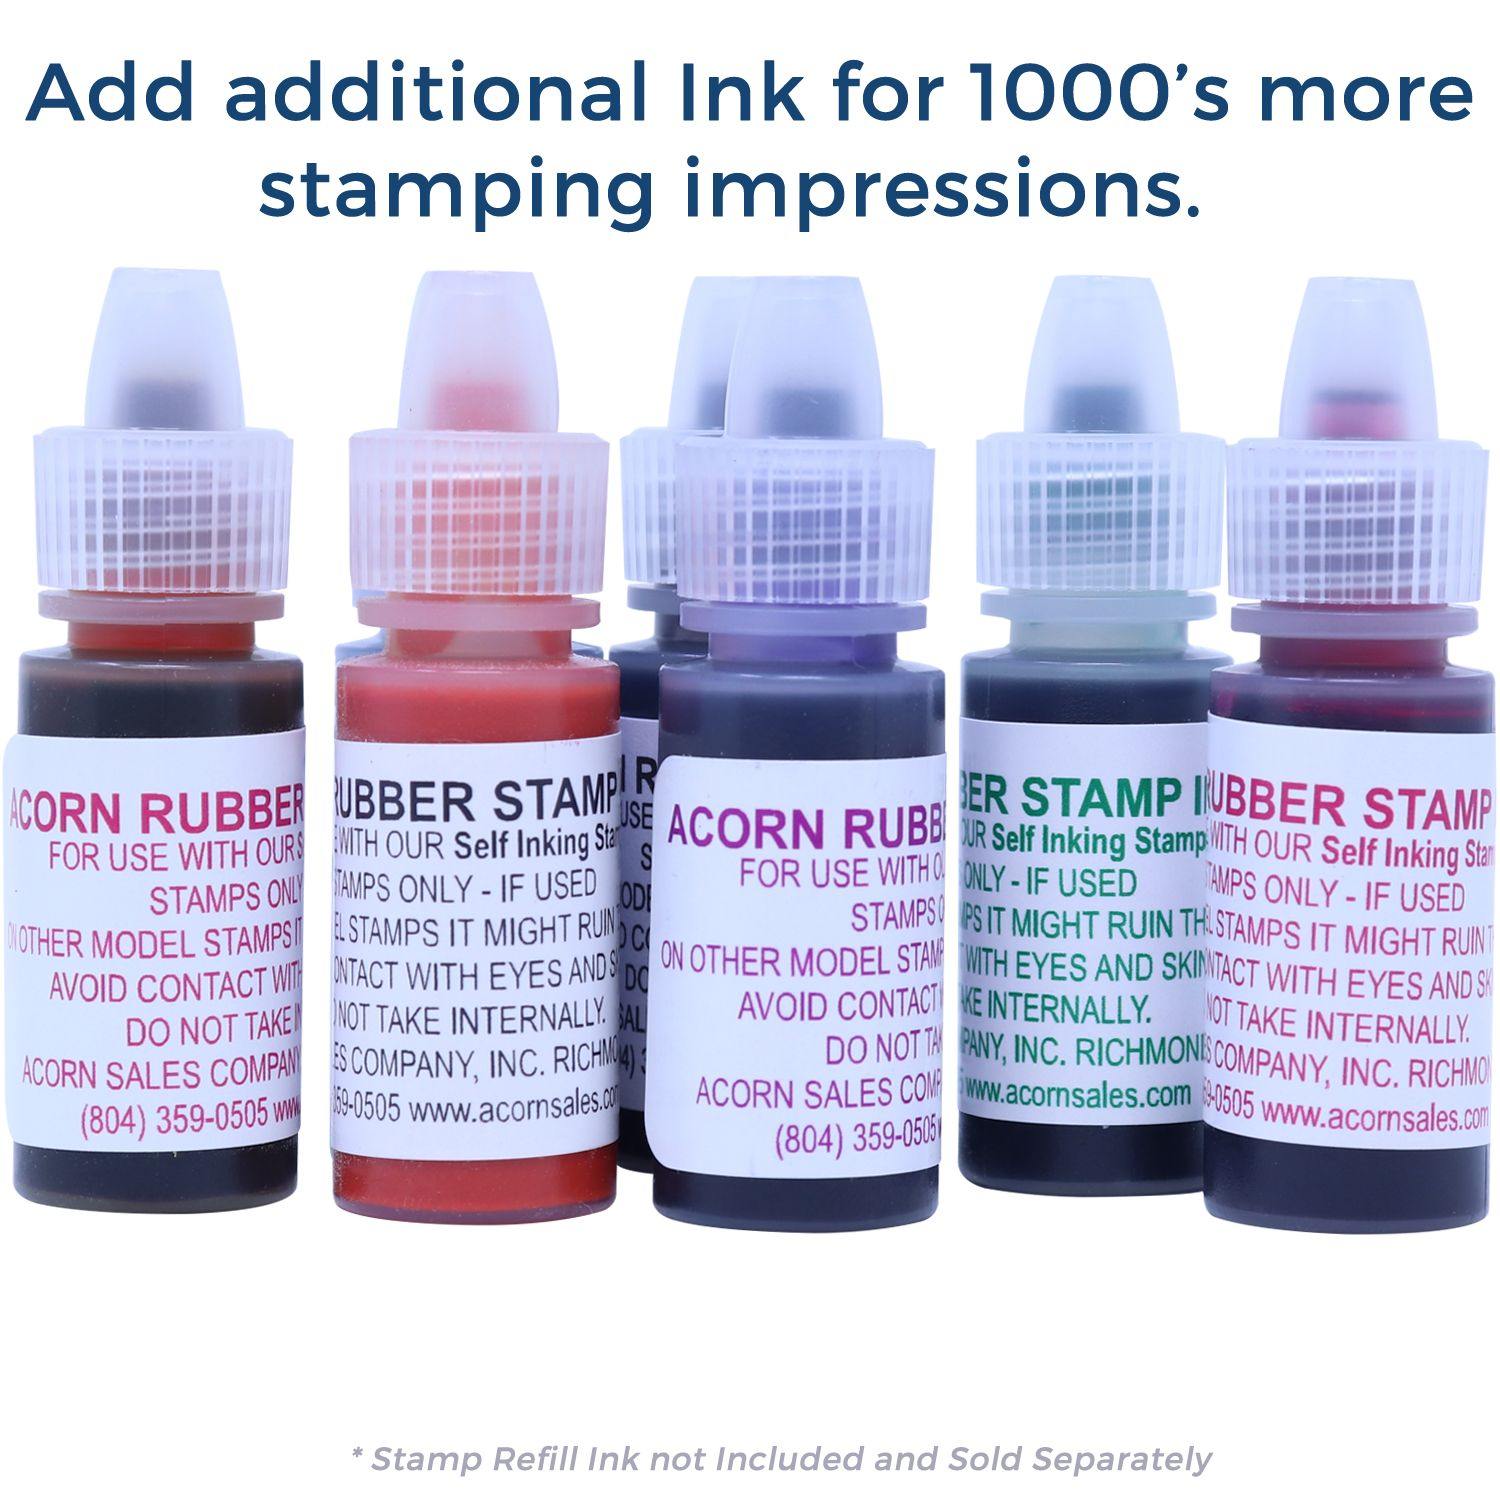 Refill Inks for Large Pre-Inked Covid-19 Patient Stamp Available